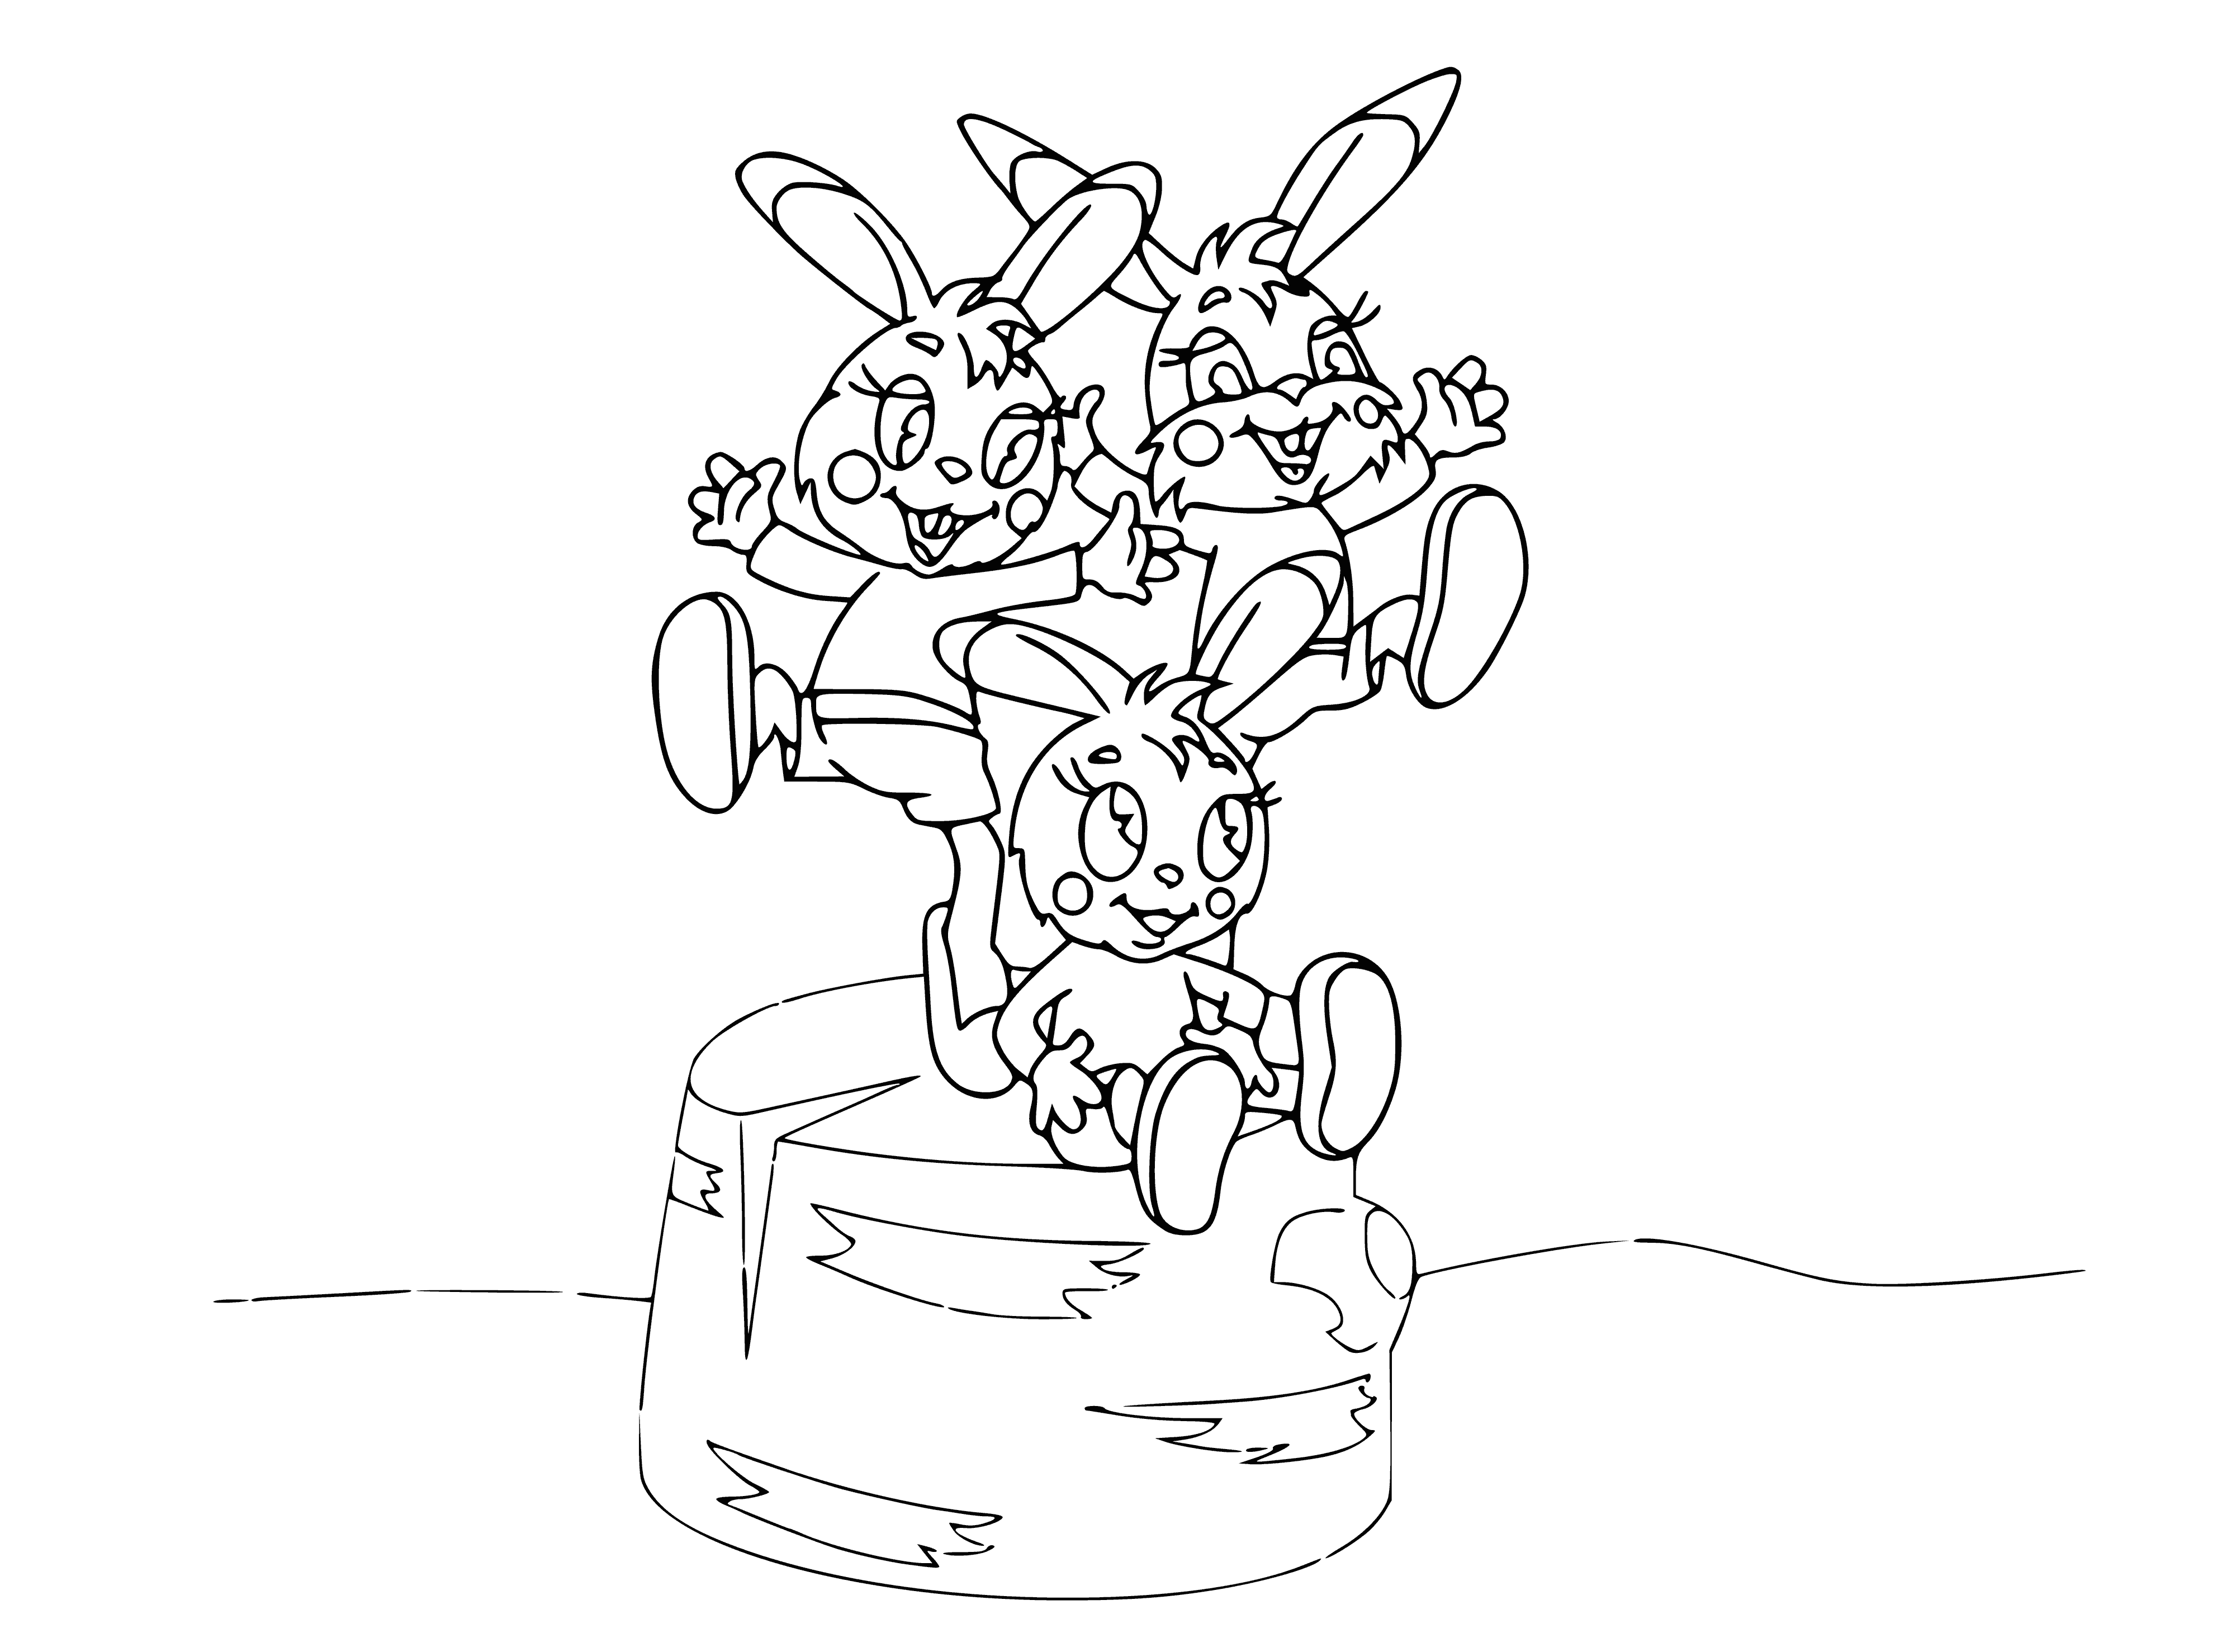 coloring page: Bunny looks at bag of apples in the middle of page; left is bag of apples.